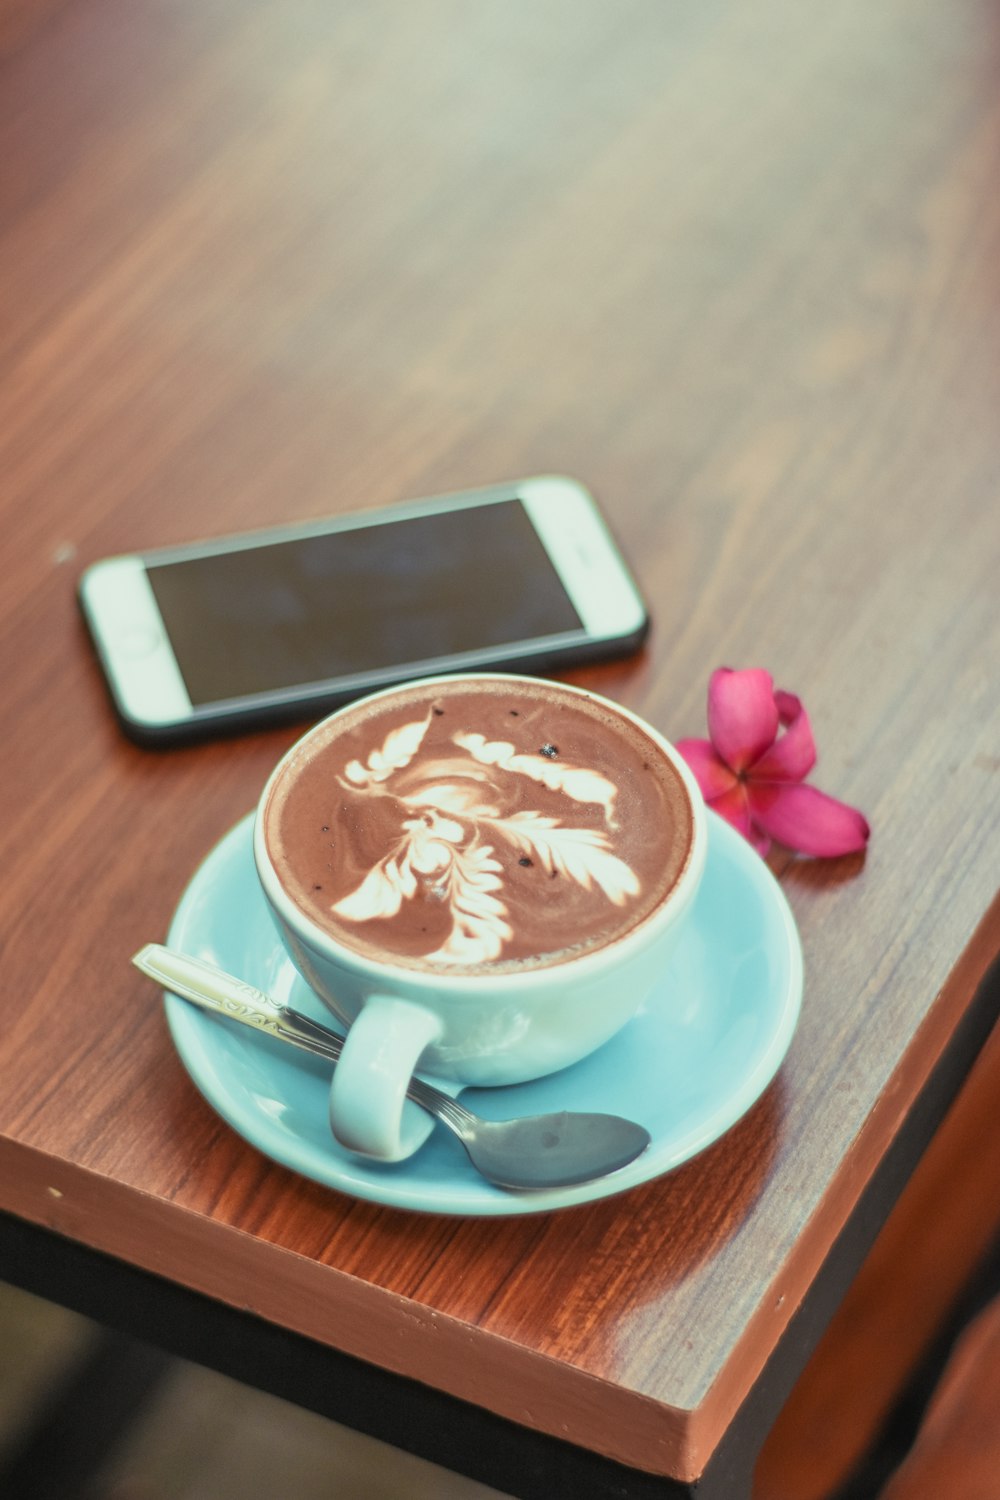 phone near a blue coffee cup with coffee and spoon close-up photography